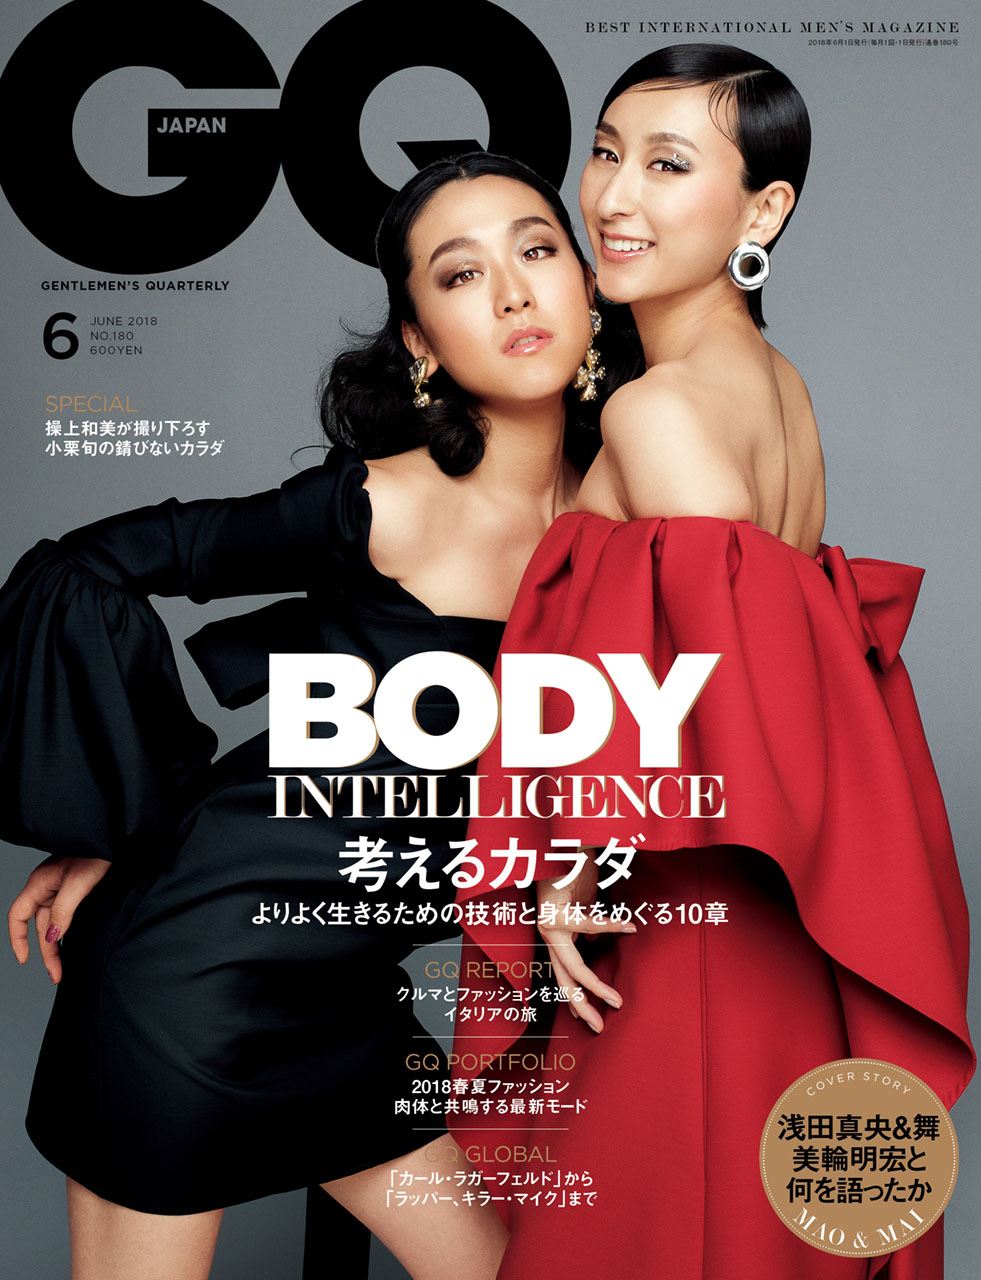 GQ JAPAN 2018年6月号 Photographed by Maciej Kucia @ AVGVST c2018 Conde Nast Japan. All rights reserved.